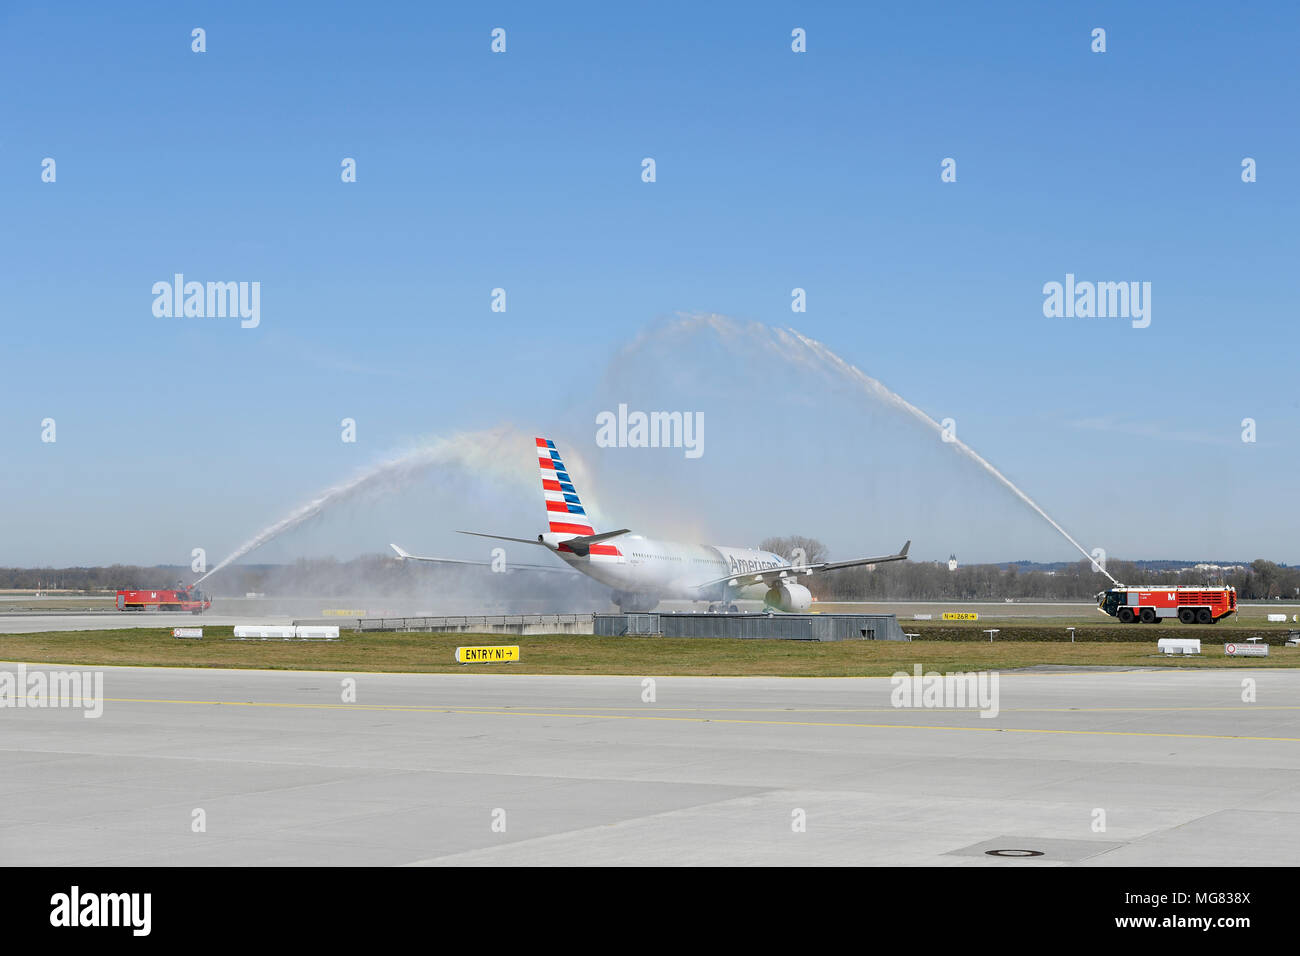 American Airlines, A330-243, A 330, 200, pilots saying goodbye, retired, water baptism, Aircraft, Airplane, Plane, Airport Munich, MUC, Germany, Stock Photo